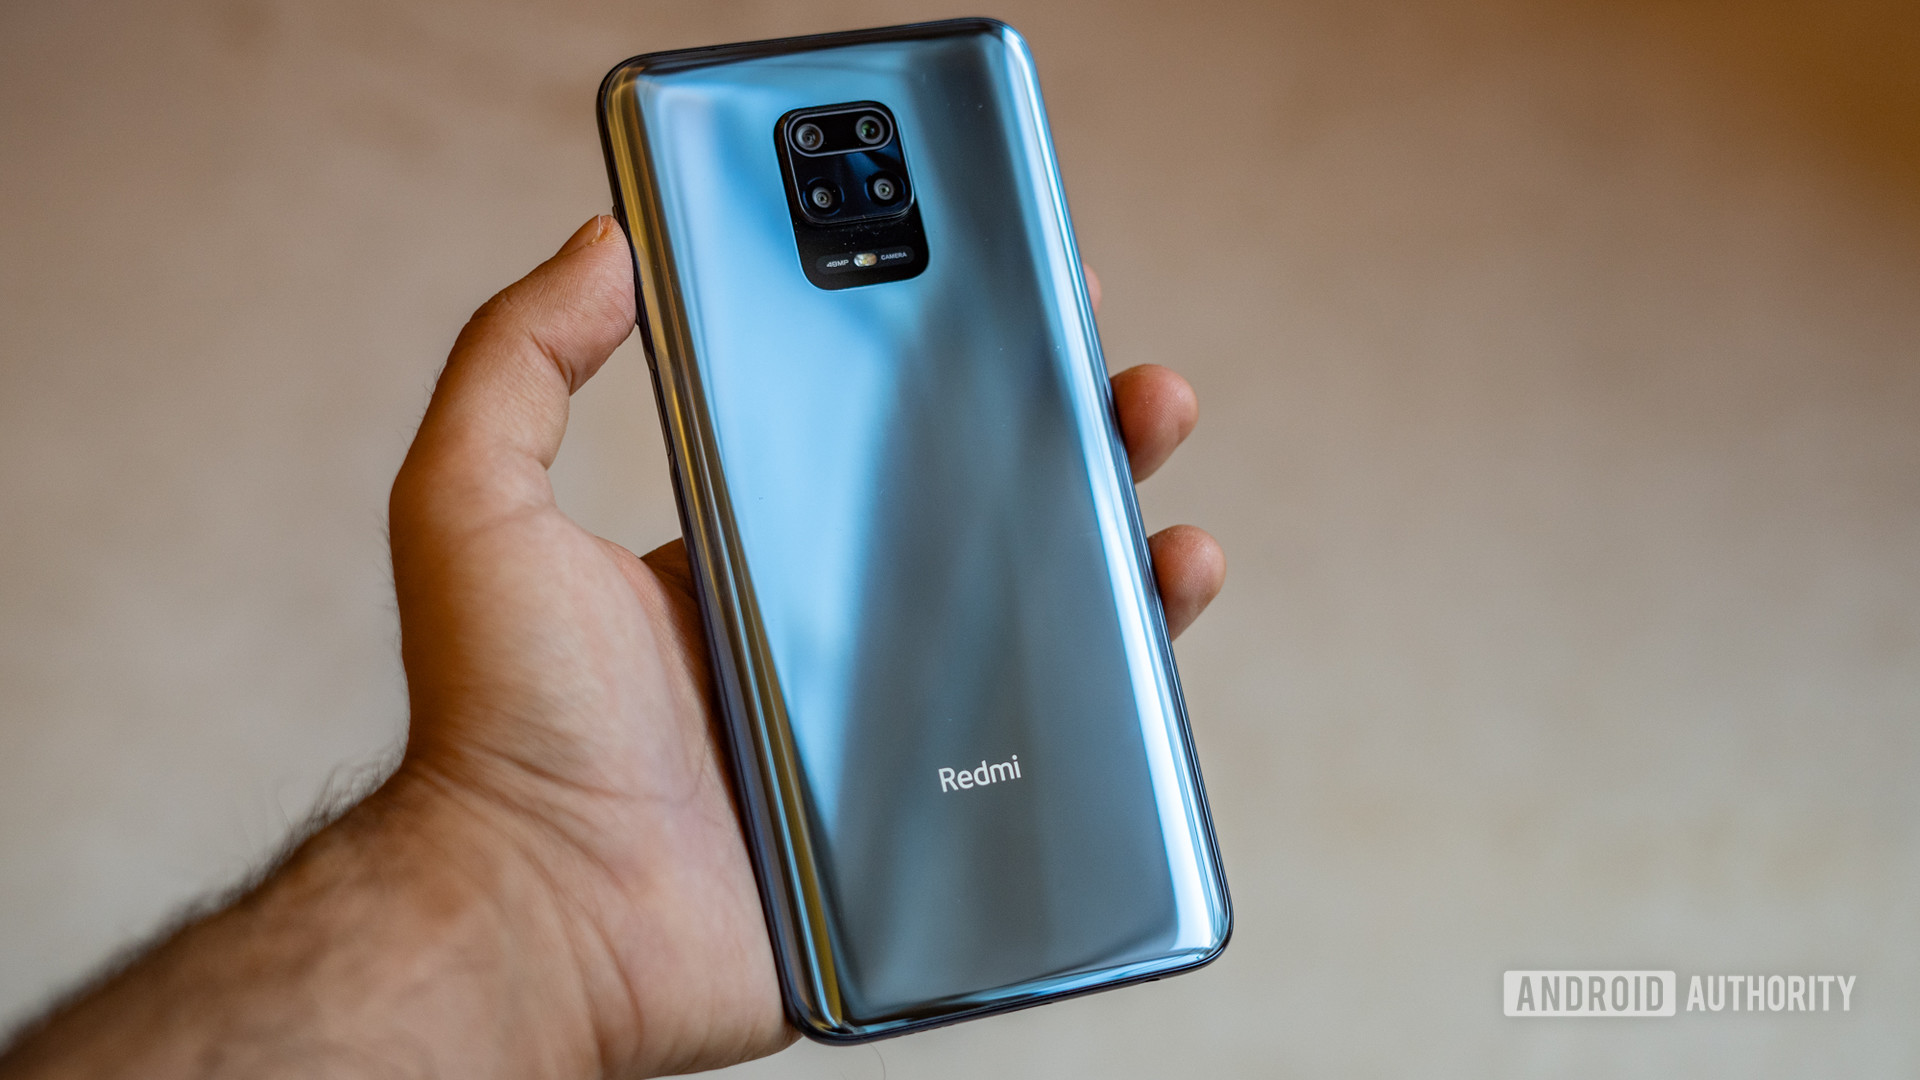 Redmi Note 9 Pro showing back in hand